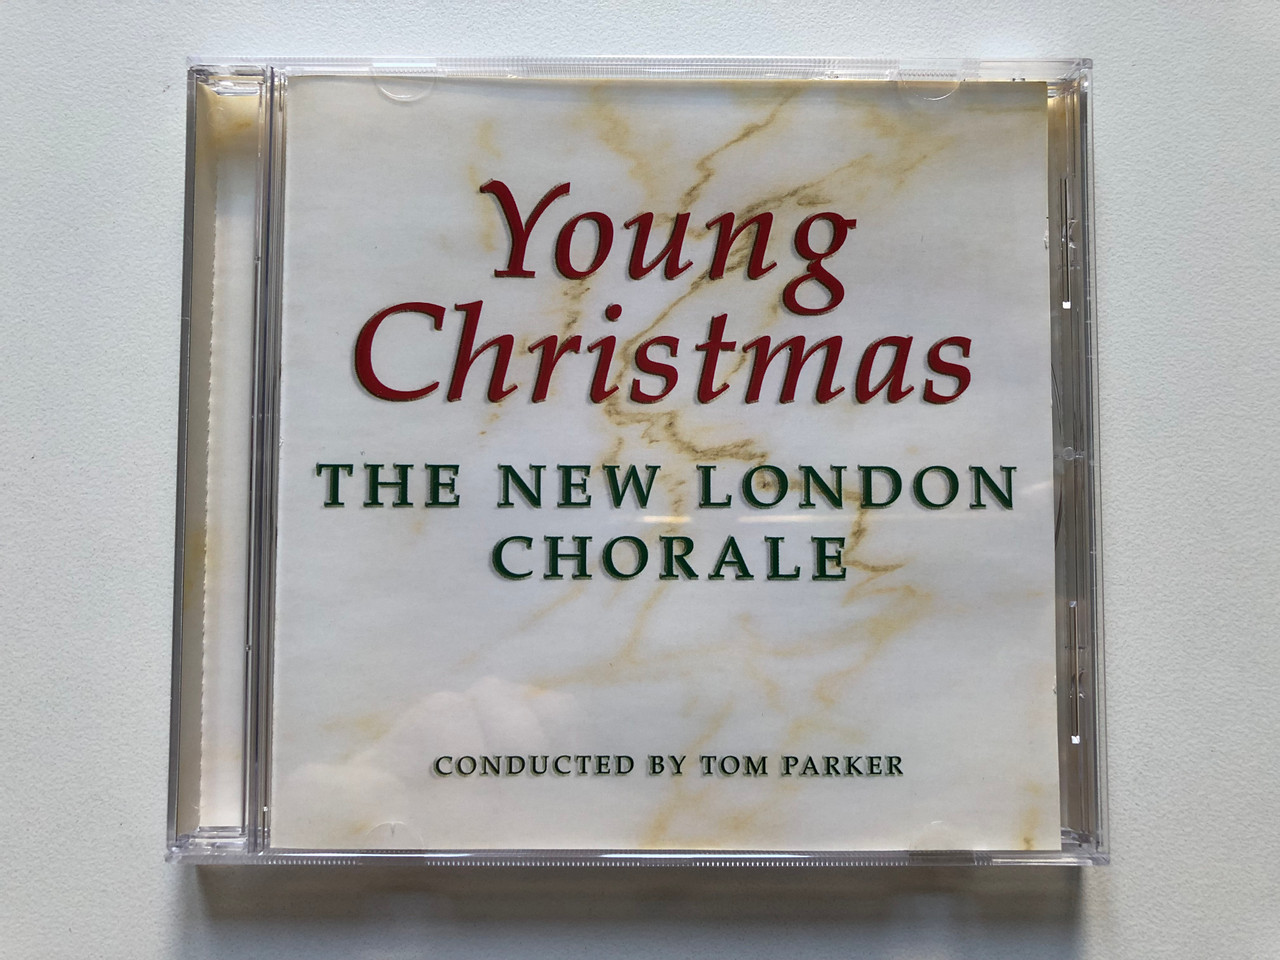 https://cdn10.bigcommerce.com/s-62bdpkt7pb/products/0/images/307430/Young_Christmas_The_New_London_Chorale_-_Conducted_By_Tom_Parker_Disky_Audio_CD_2001_CH_708292_1__37667.1698659468.1280.1280.JPG?c=2